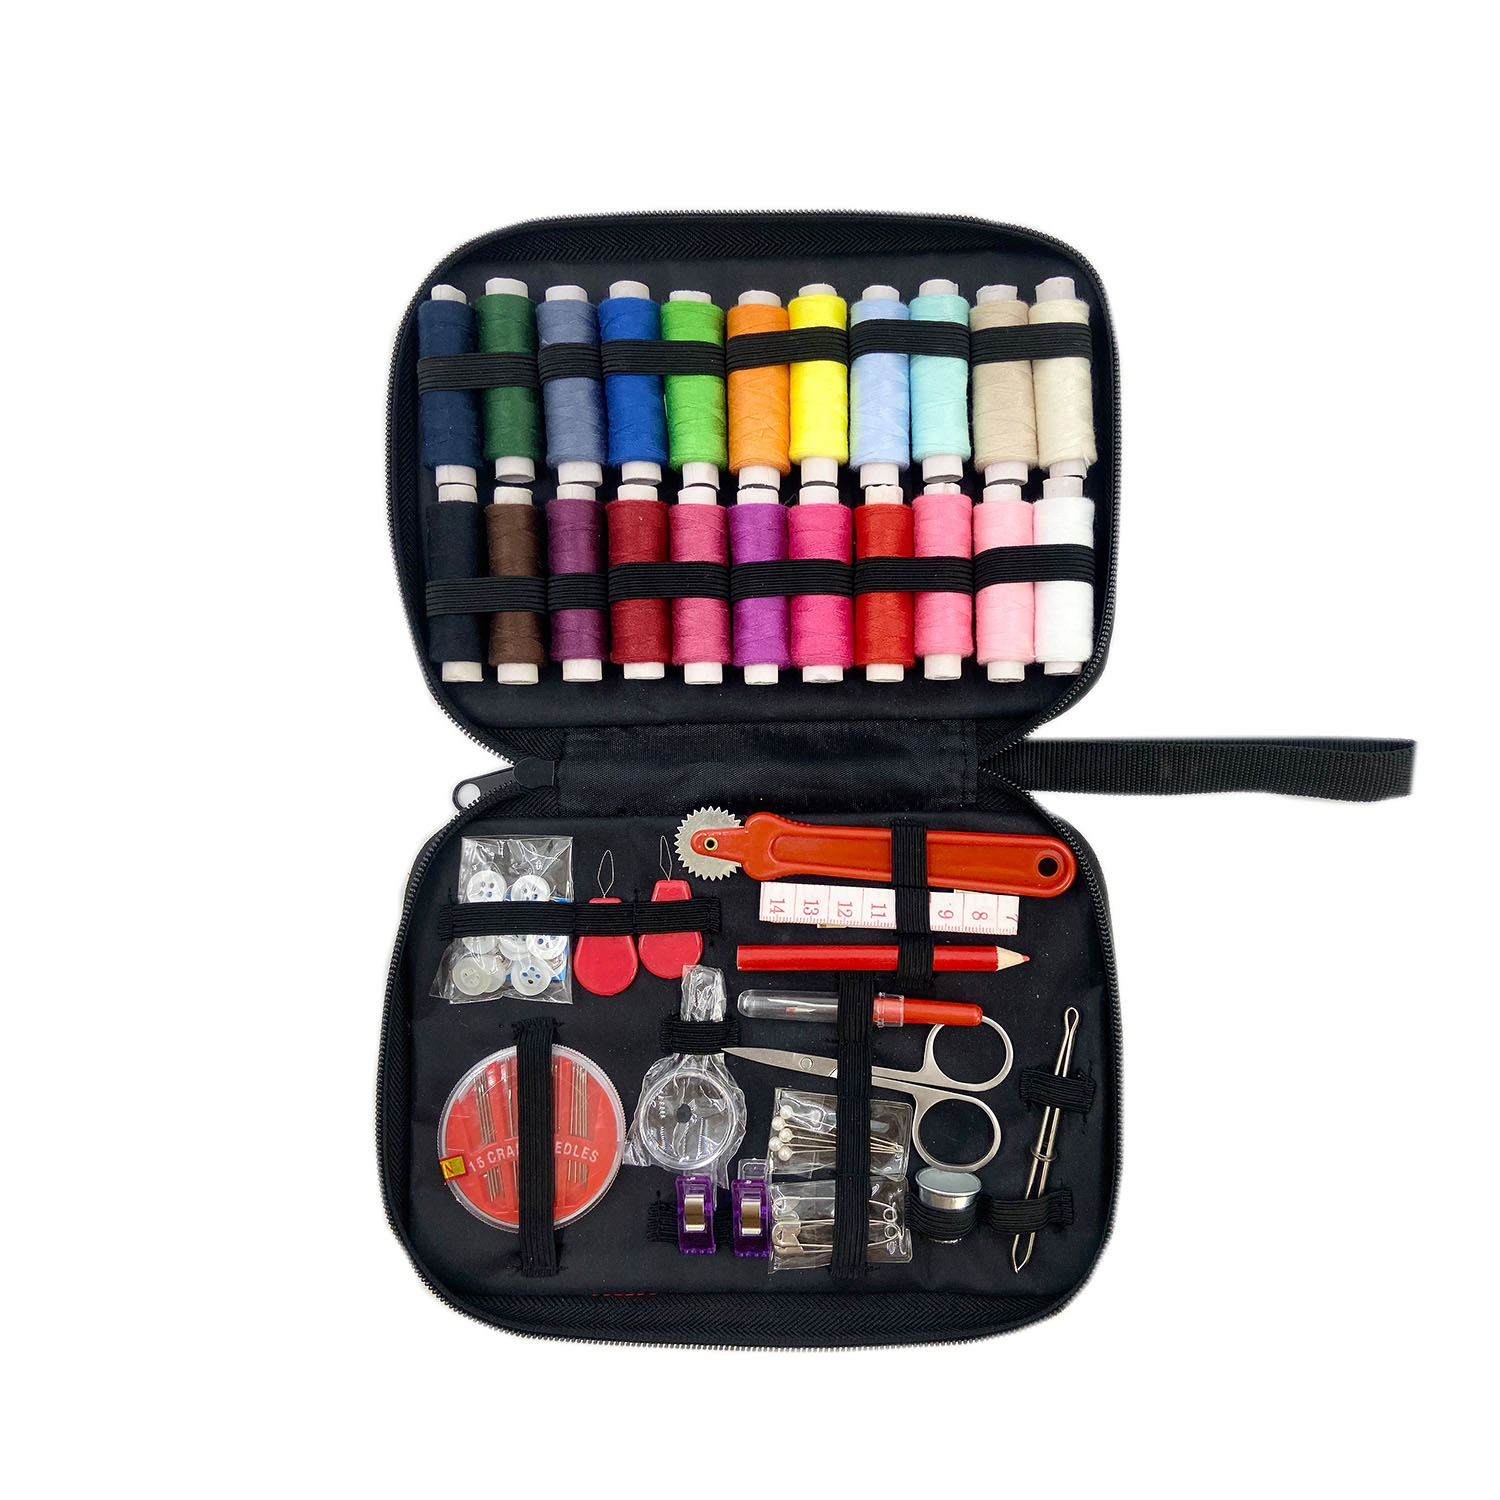 Mumcraft Sewing Kit Travel Professional With Over 16 Sewing Accessories For Gifts